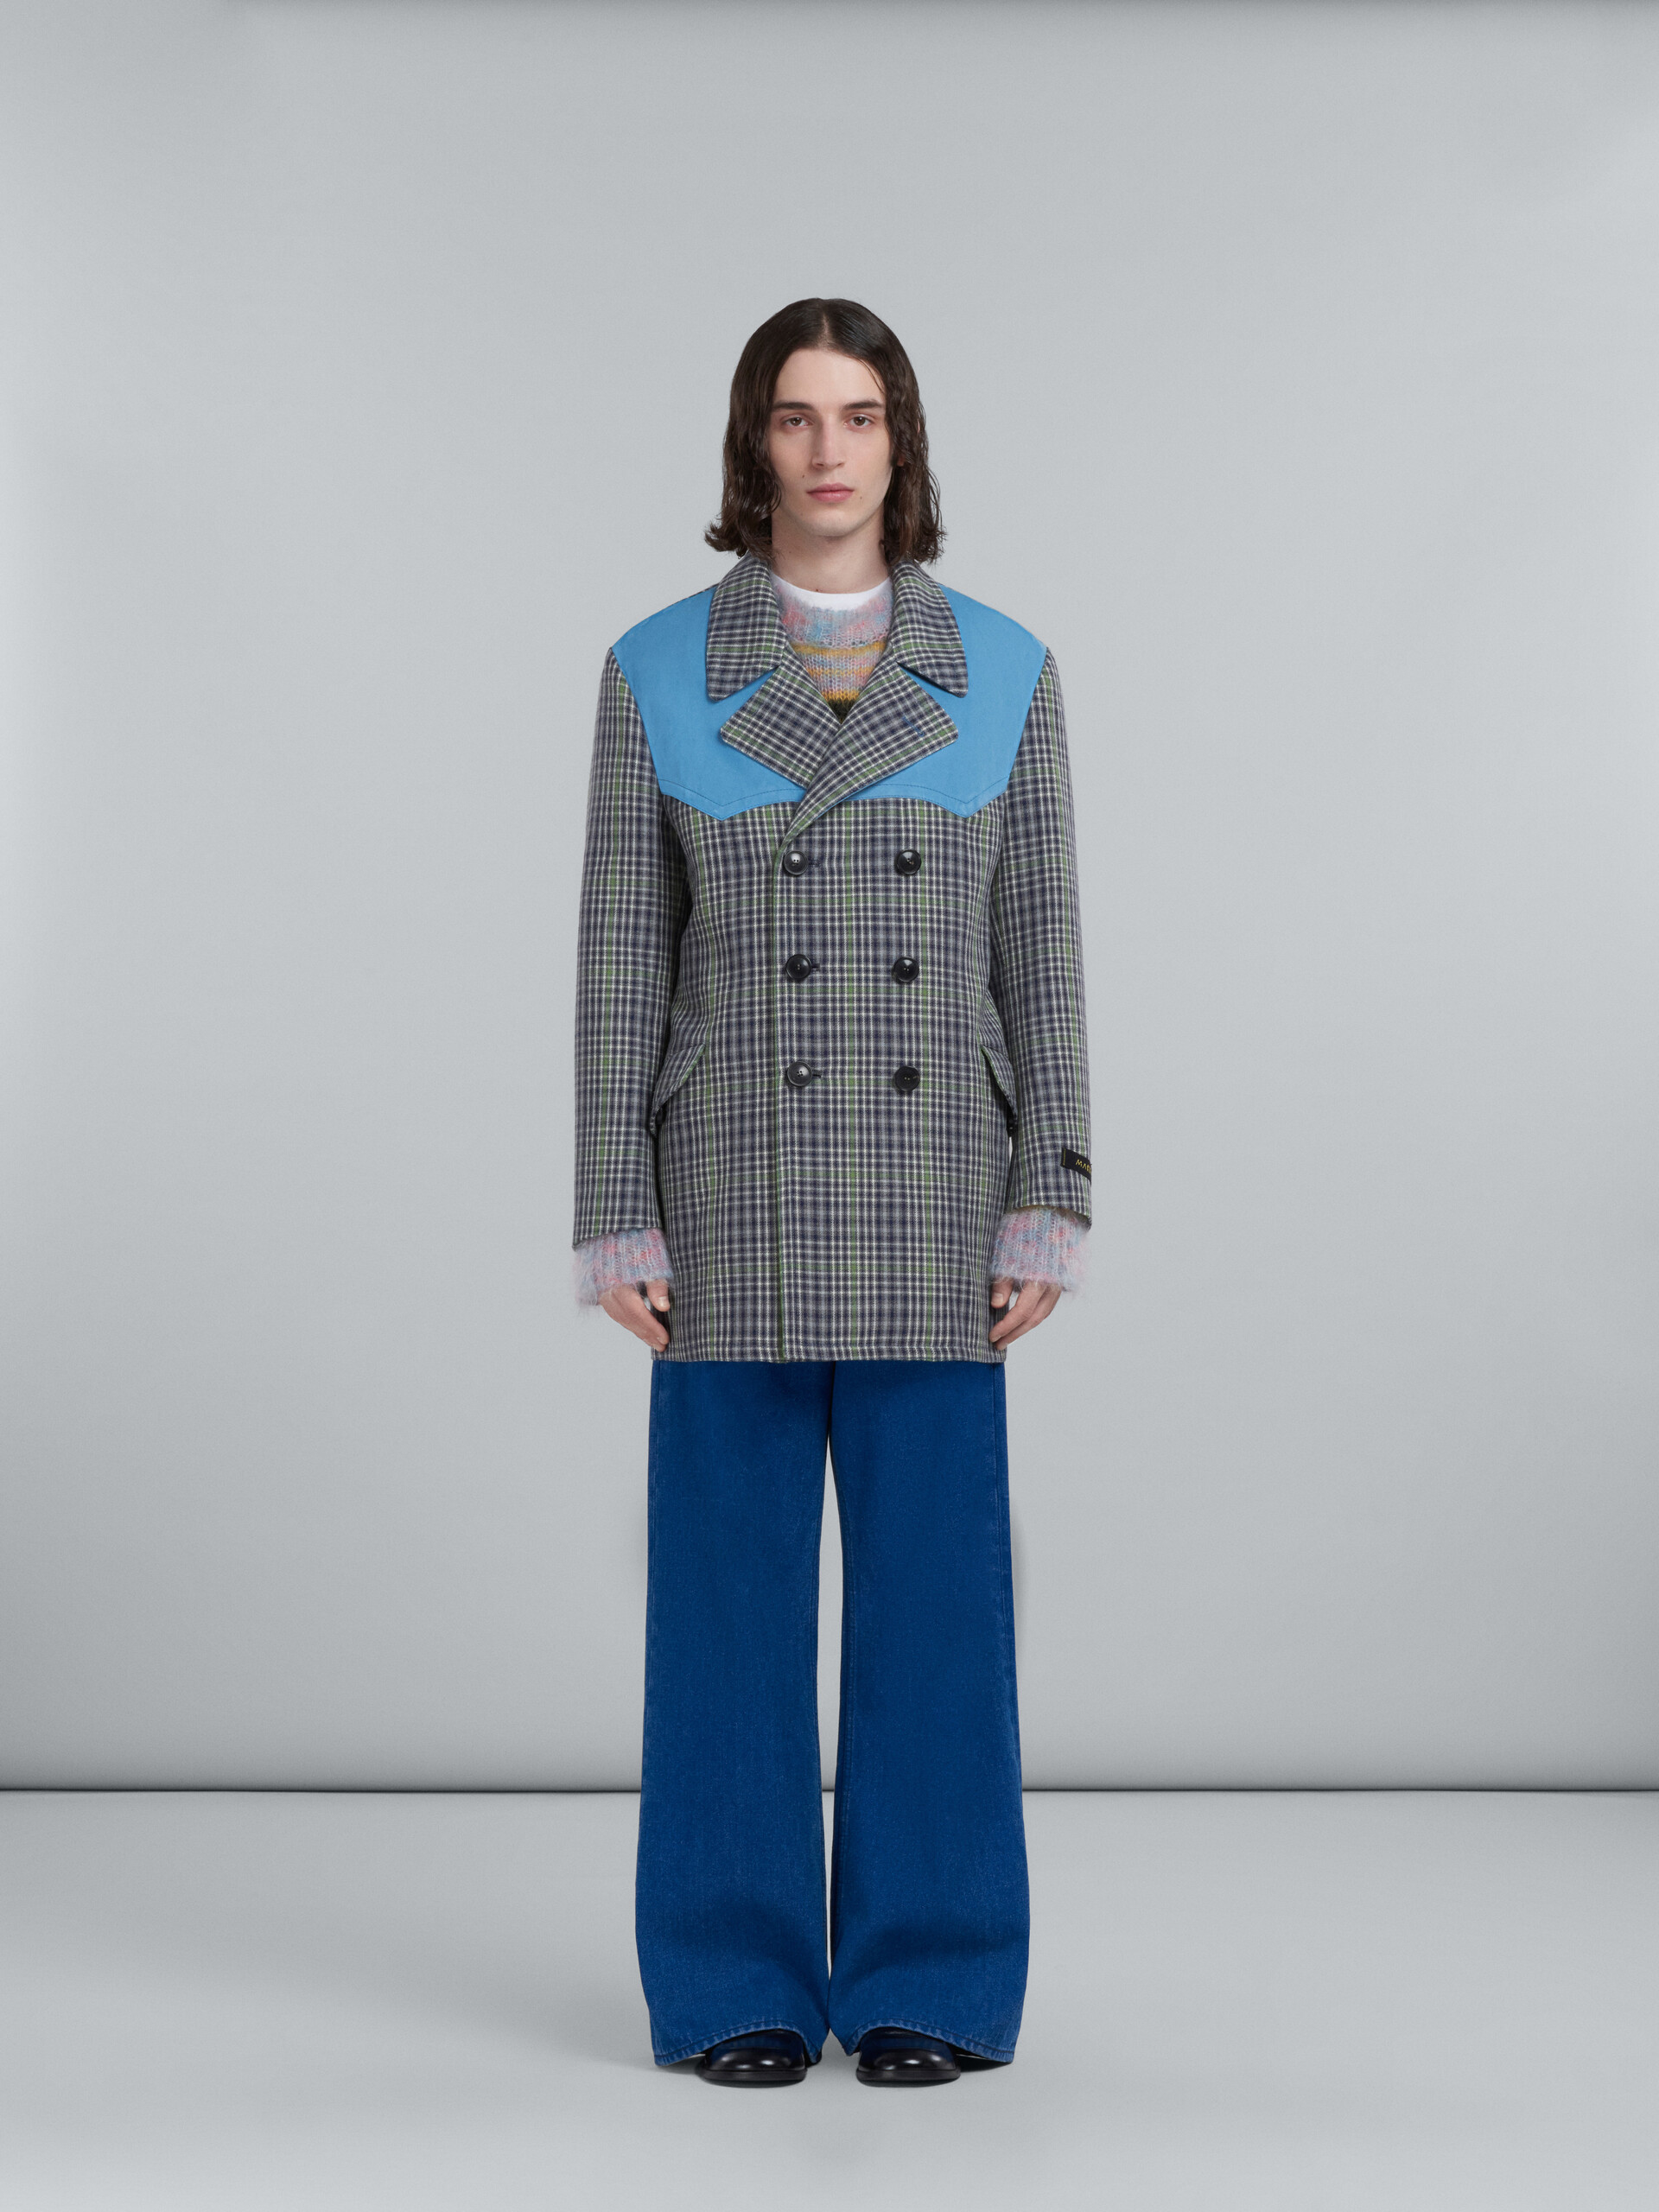 Double-breasted coat in grey chequered wool - Coat - Image 2